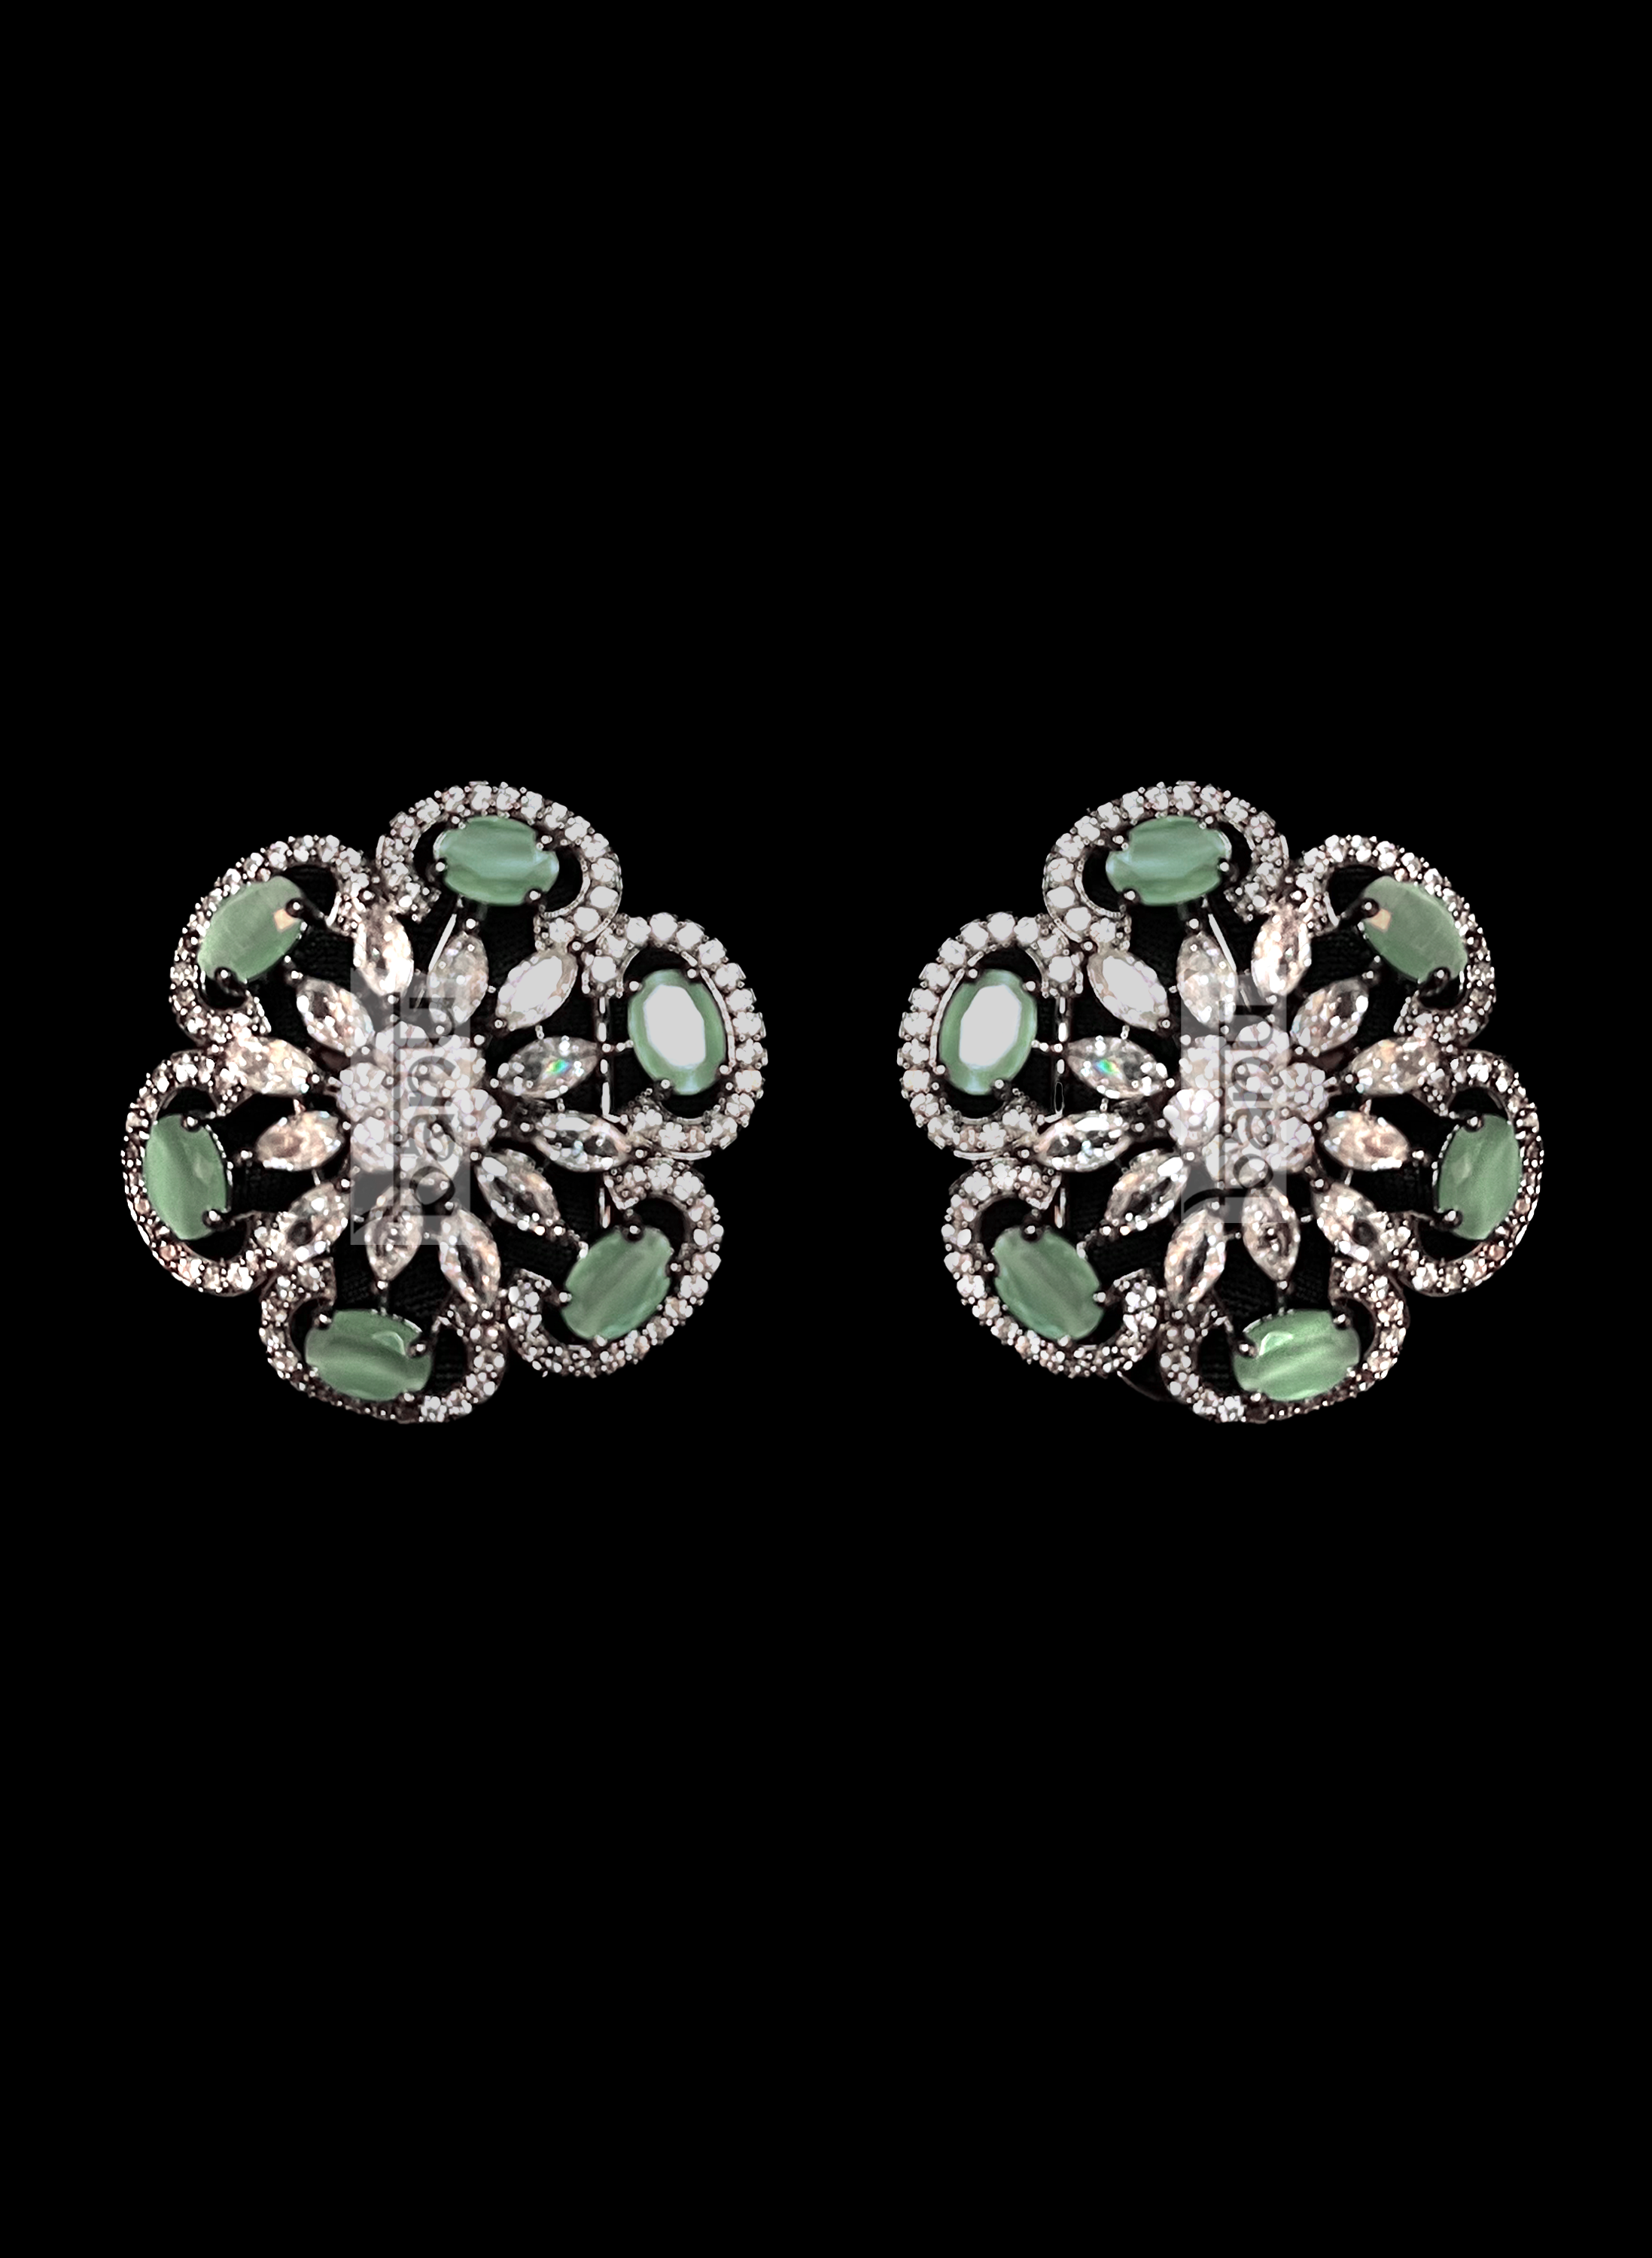 Indian CZ crystal studded earrings with green onyx